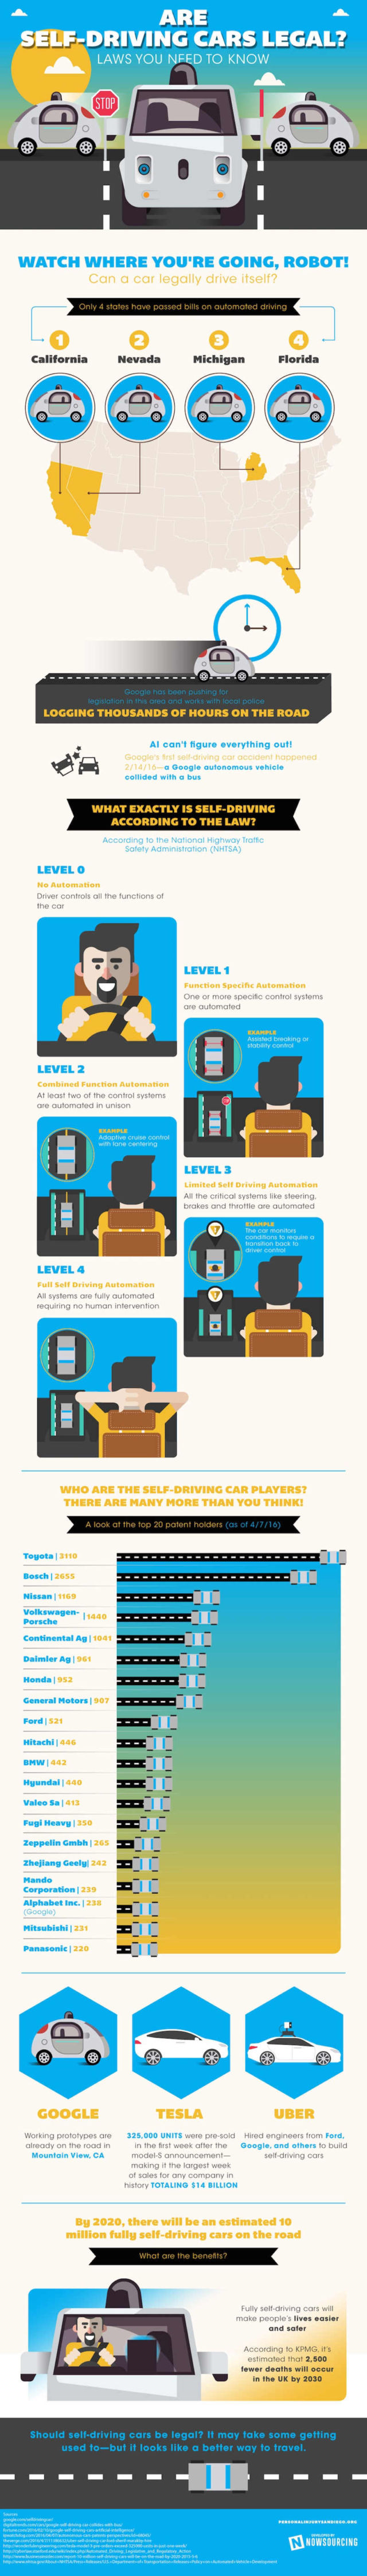 Are self-driving cars legal infographic 